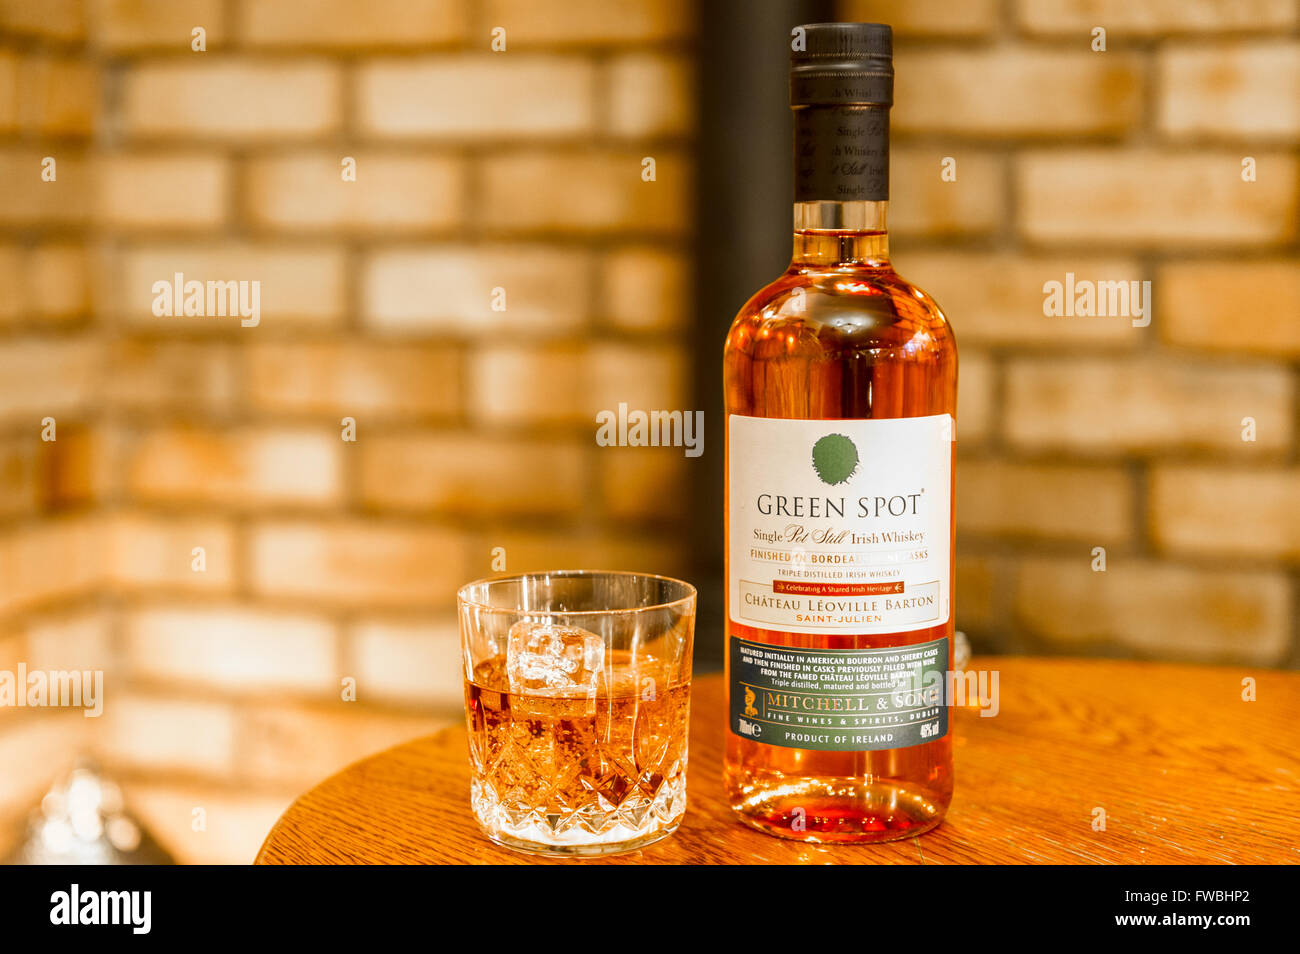 Bottle of Green Spot triple distilled whiskey with a glass of whiskey with ice cubes. Stock Photo